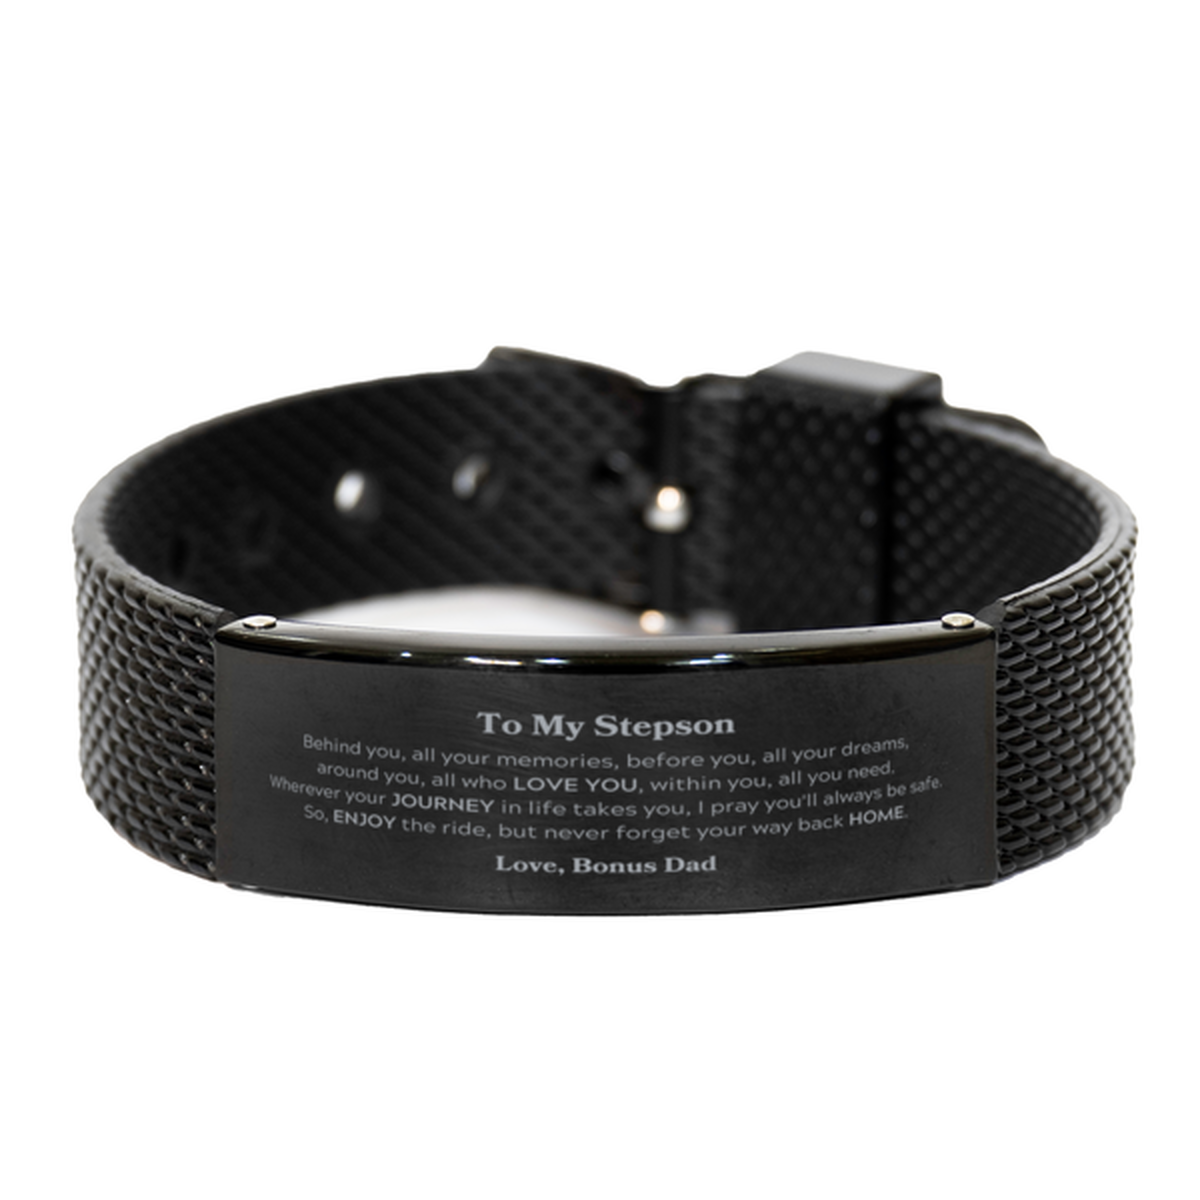 To My Stepson Graduation Gifts from Bonus Dad, Stepson Black Shark Mesh Bracelet Christmas Birthday Gifts for Stepson Behind you, all your memories, before you, all your dreams. Love, Bonus Dad